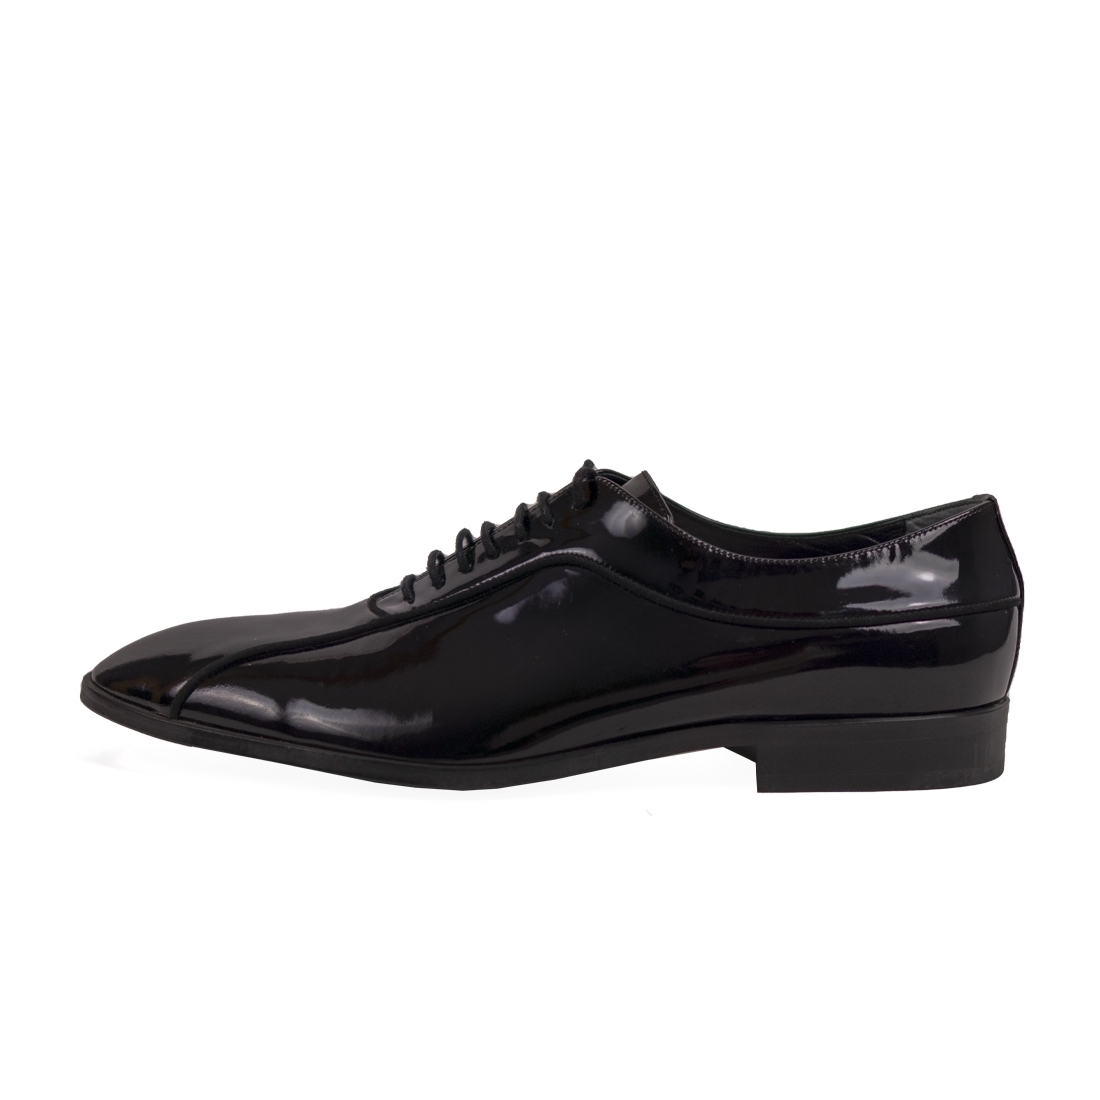 Peppe Intesello - Black Lace-Up Oxfords Dress Shoes Peppe - Cowhide ...